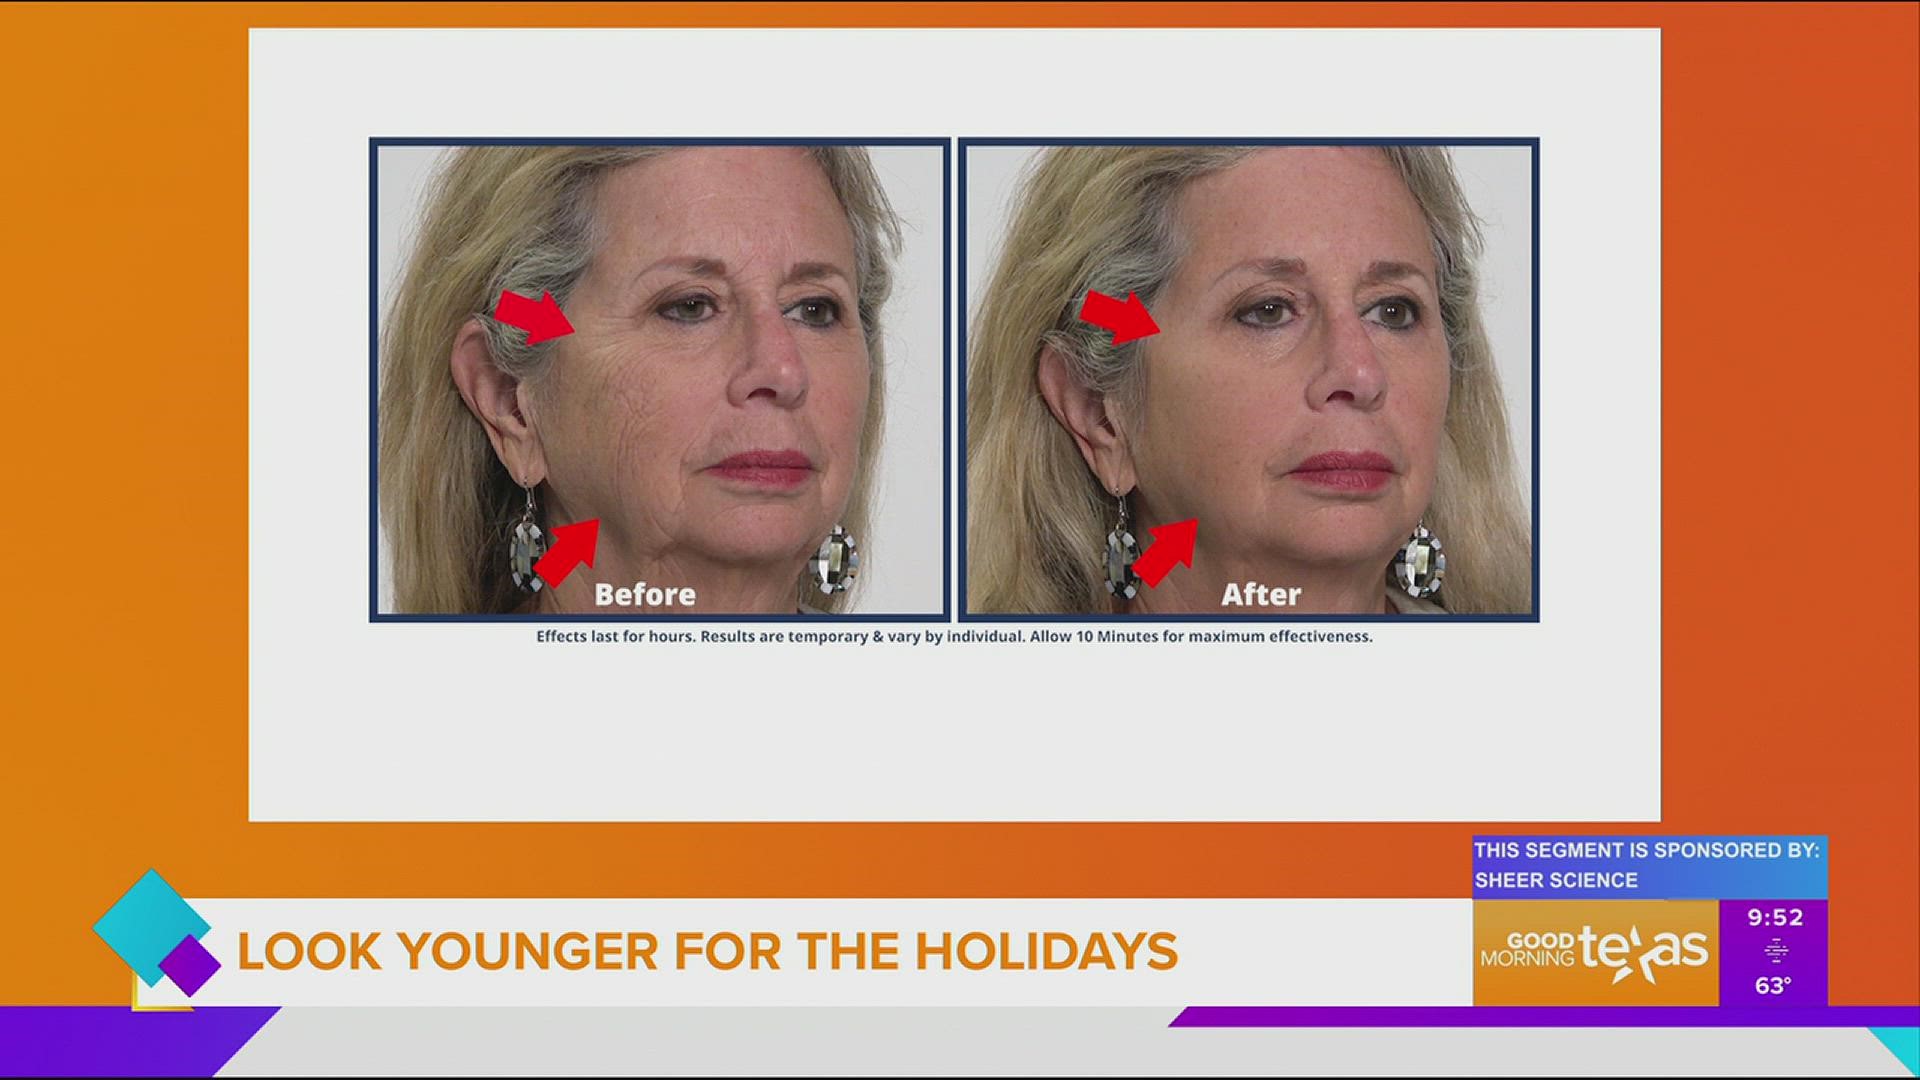 Look younger for the holidays